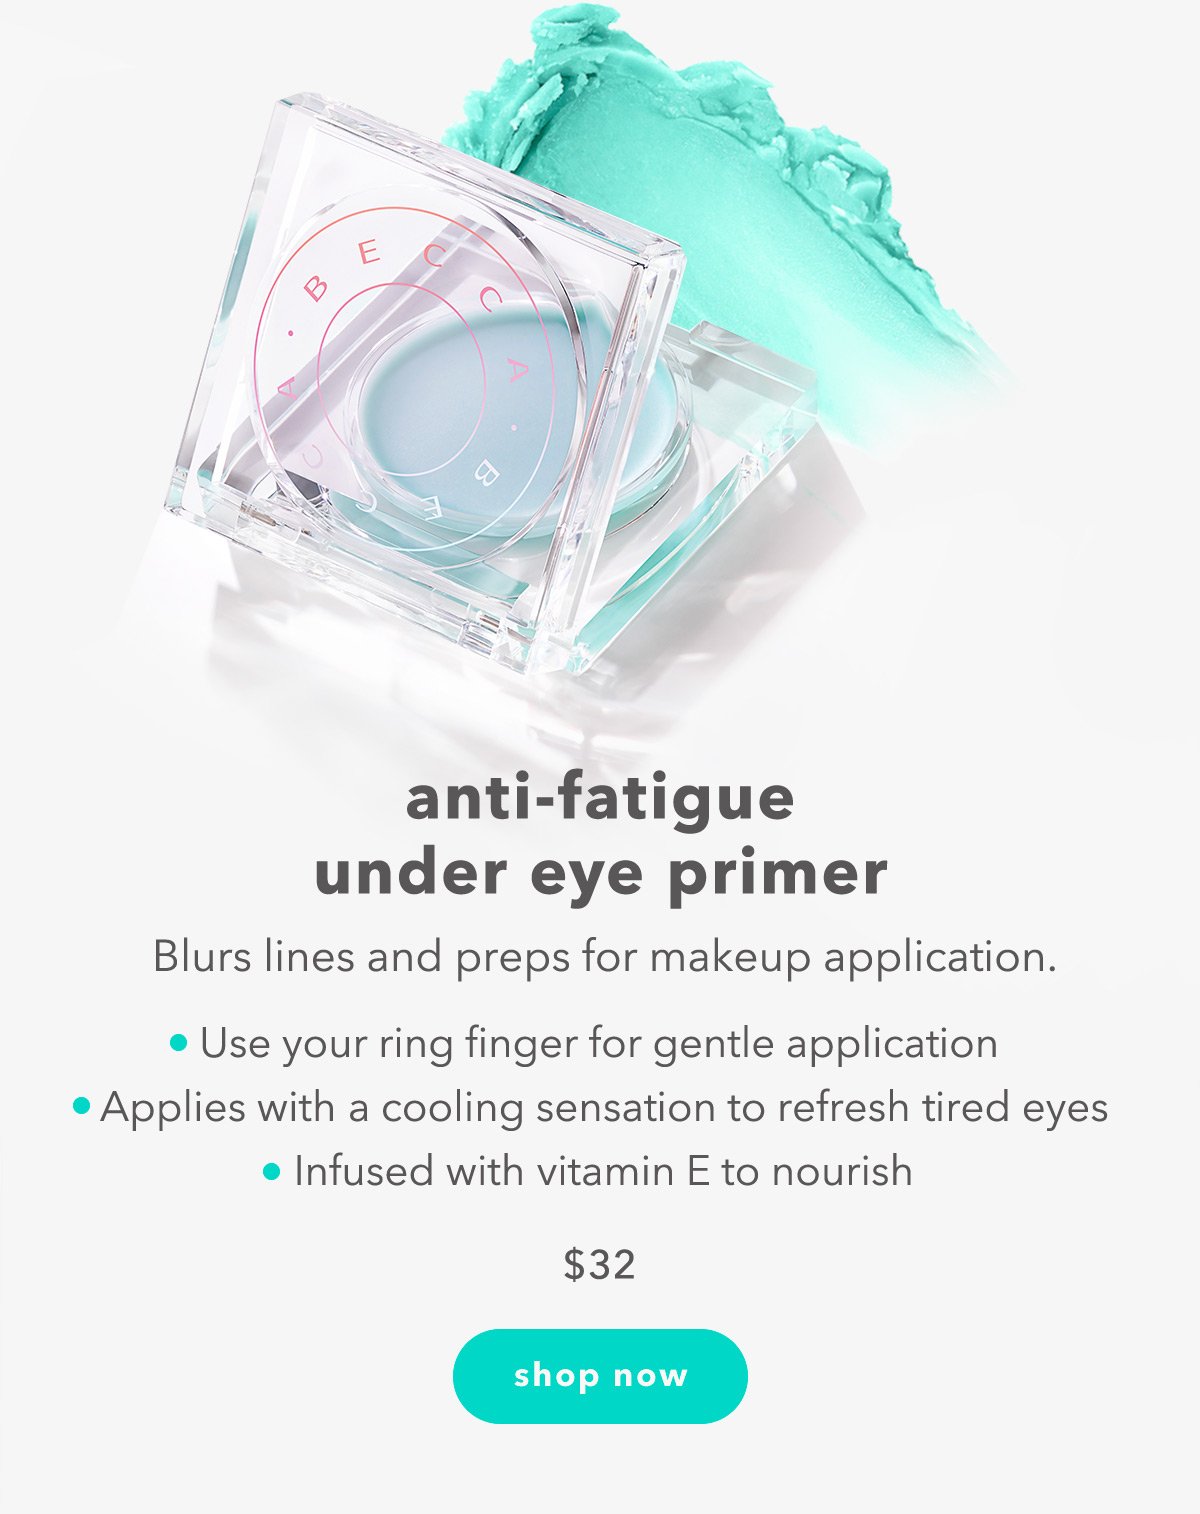 anti-fatigue under eye primer | Blurs lines and preps for makeup application.

Use your ring finger for gentle application 
Applies with a cooling sensation to refresh tired eyes
Infused with vitamin E to nourish | $32 shop now